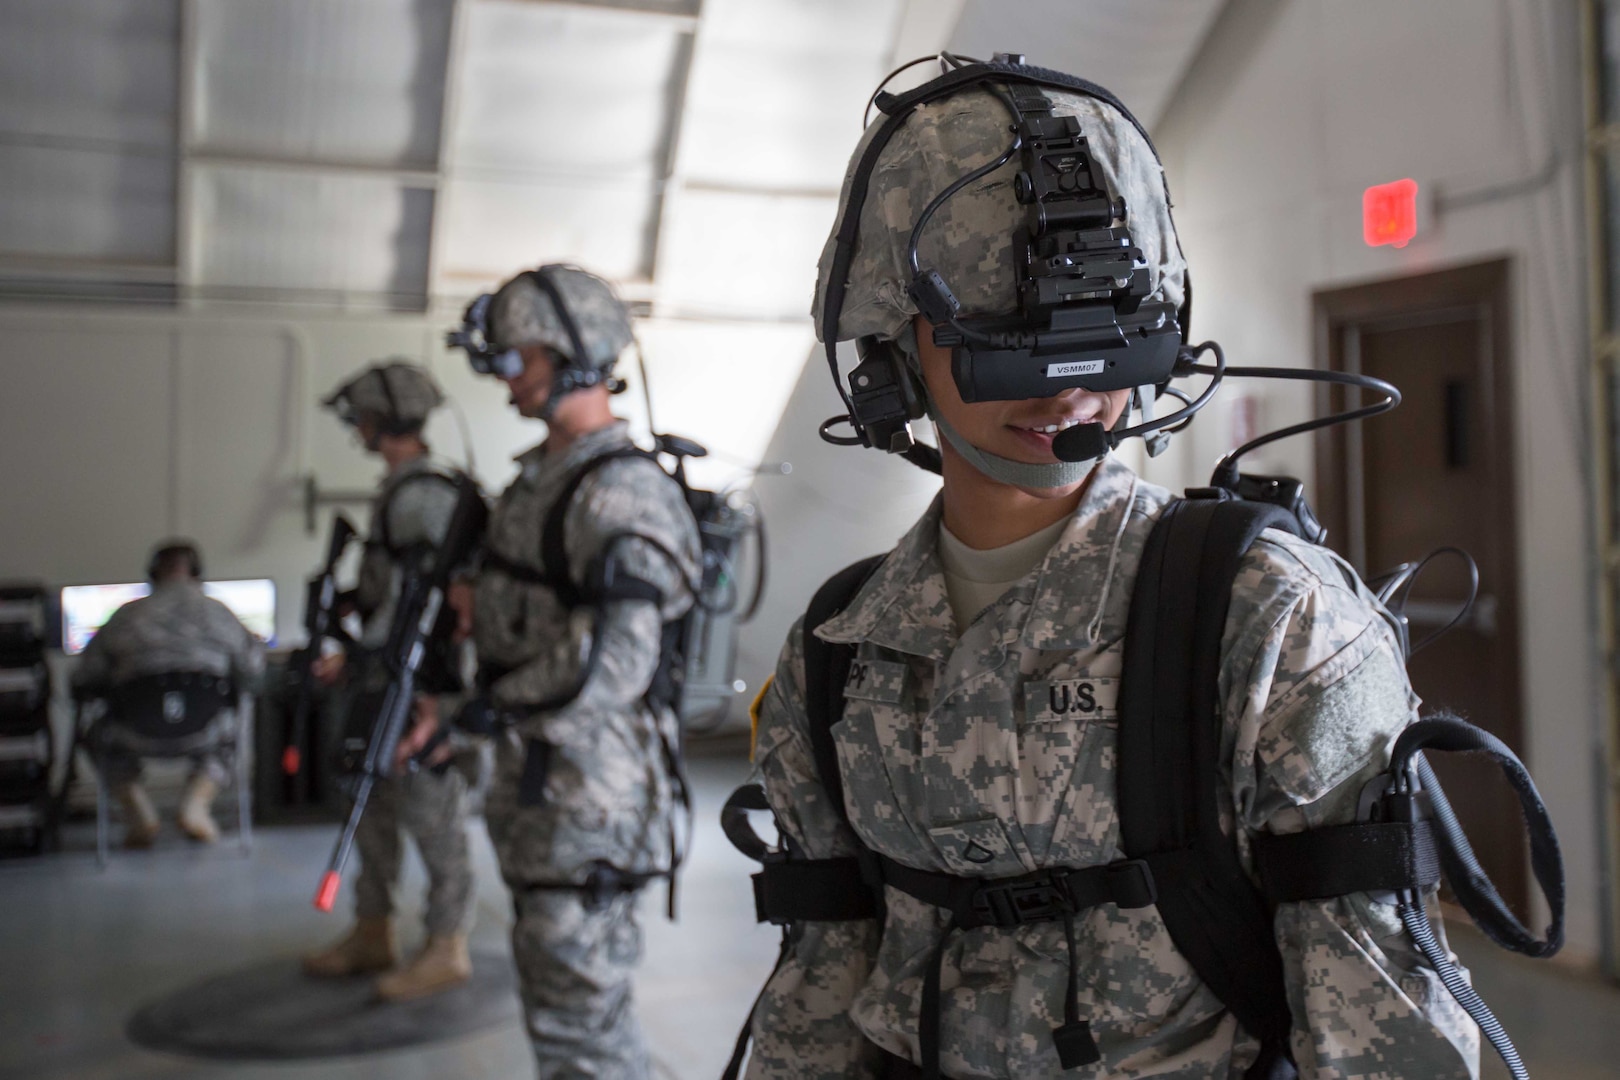 Pfc. Shante Sapp, assigned to Headquarters and Headquarters Company, 35th Engineer Brigade, moves her head to look around in a virtual training simulation using the Dismounted Soldier Training System on June 16, 2015 at Fort Leonard Wood, Missouri. The system uses motion tracking to allow soldiers to train in a simulated deployed environment.